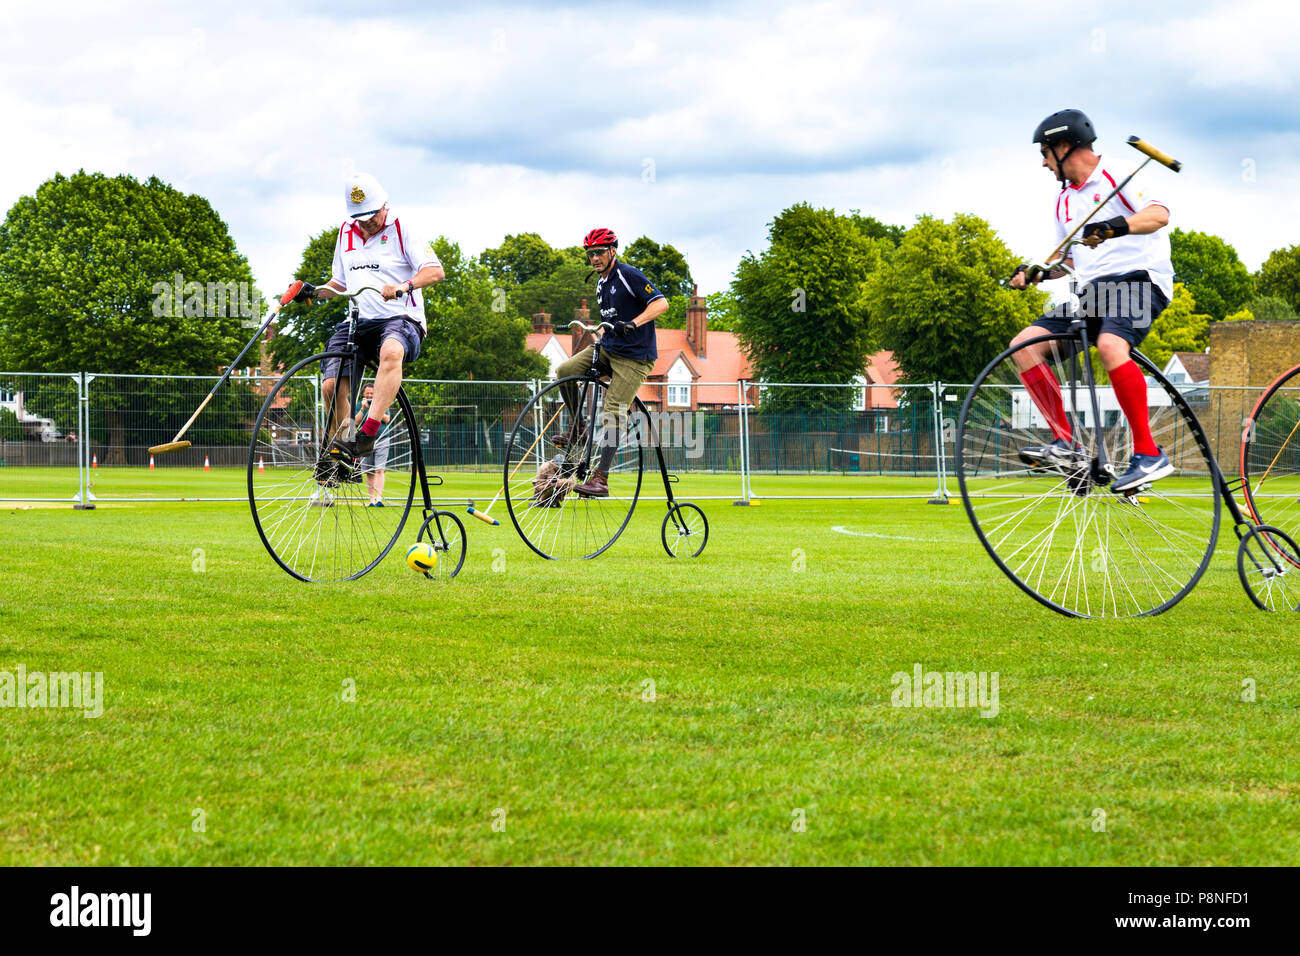 Penny farthing polo match at the World Cycling Revival Festival 2018, London, UK Stock Photo